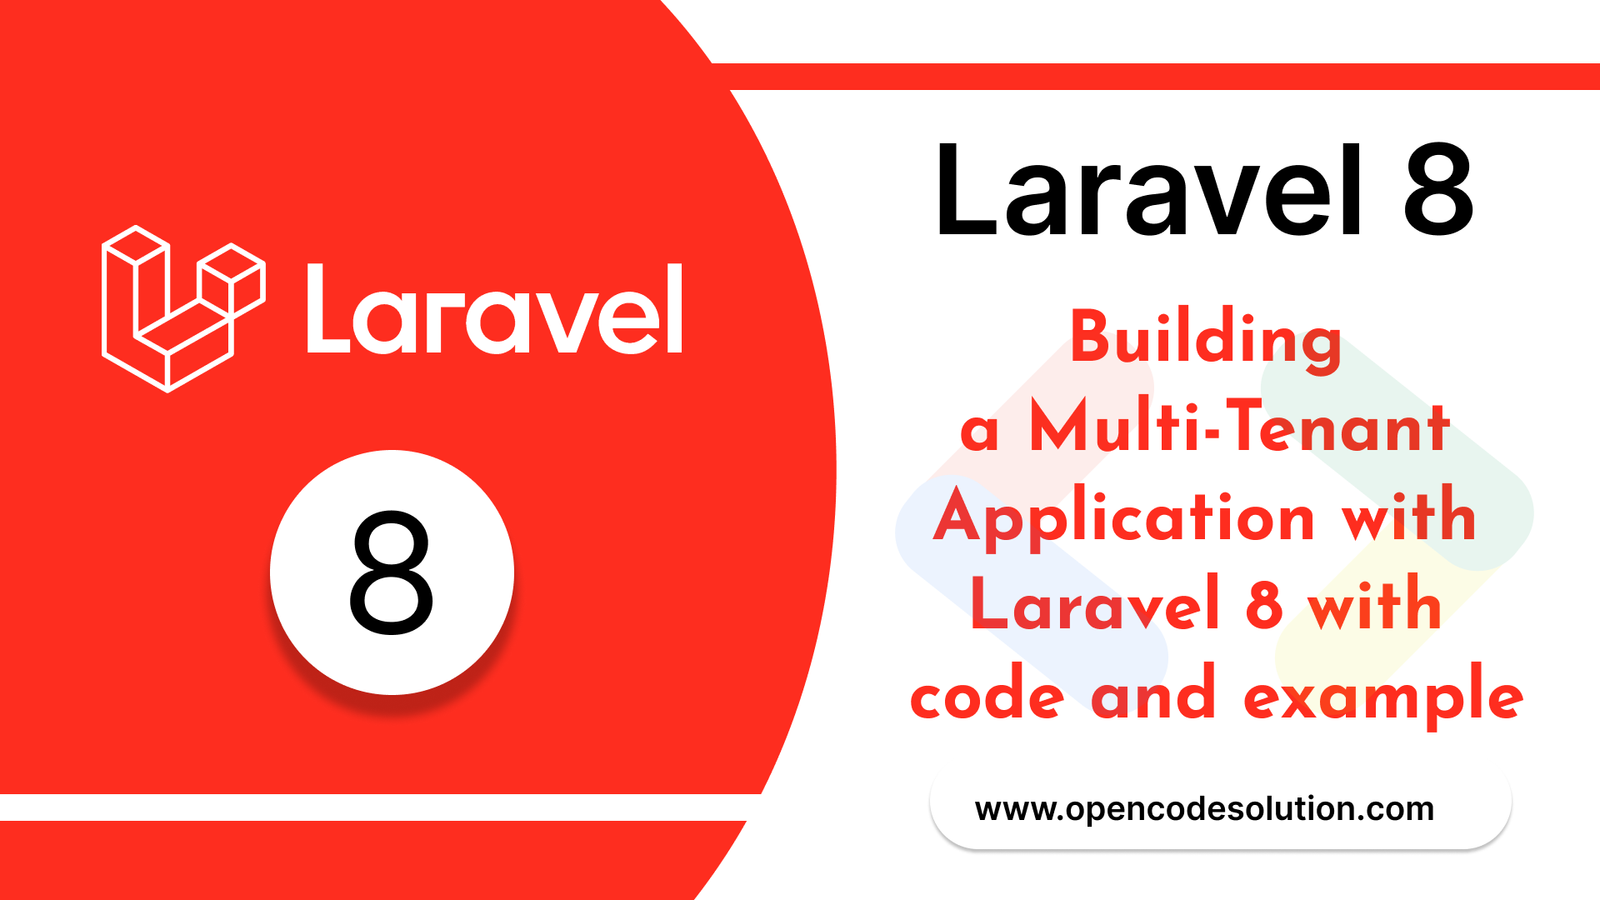 Building a Multi-Tenant Application with Laravel 8 with code and example